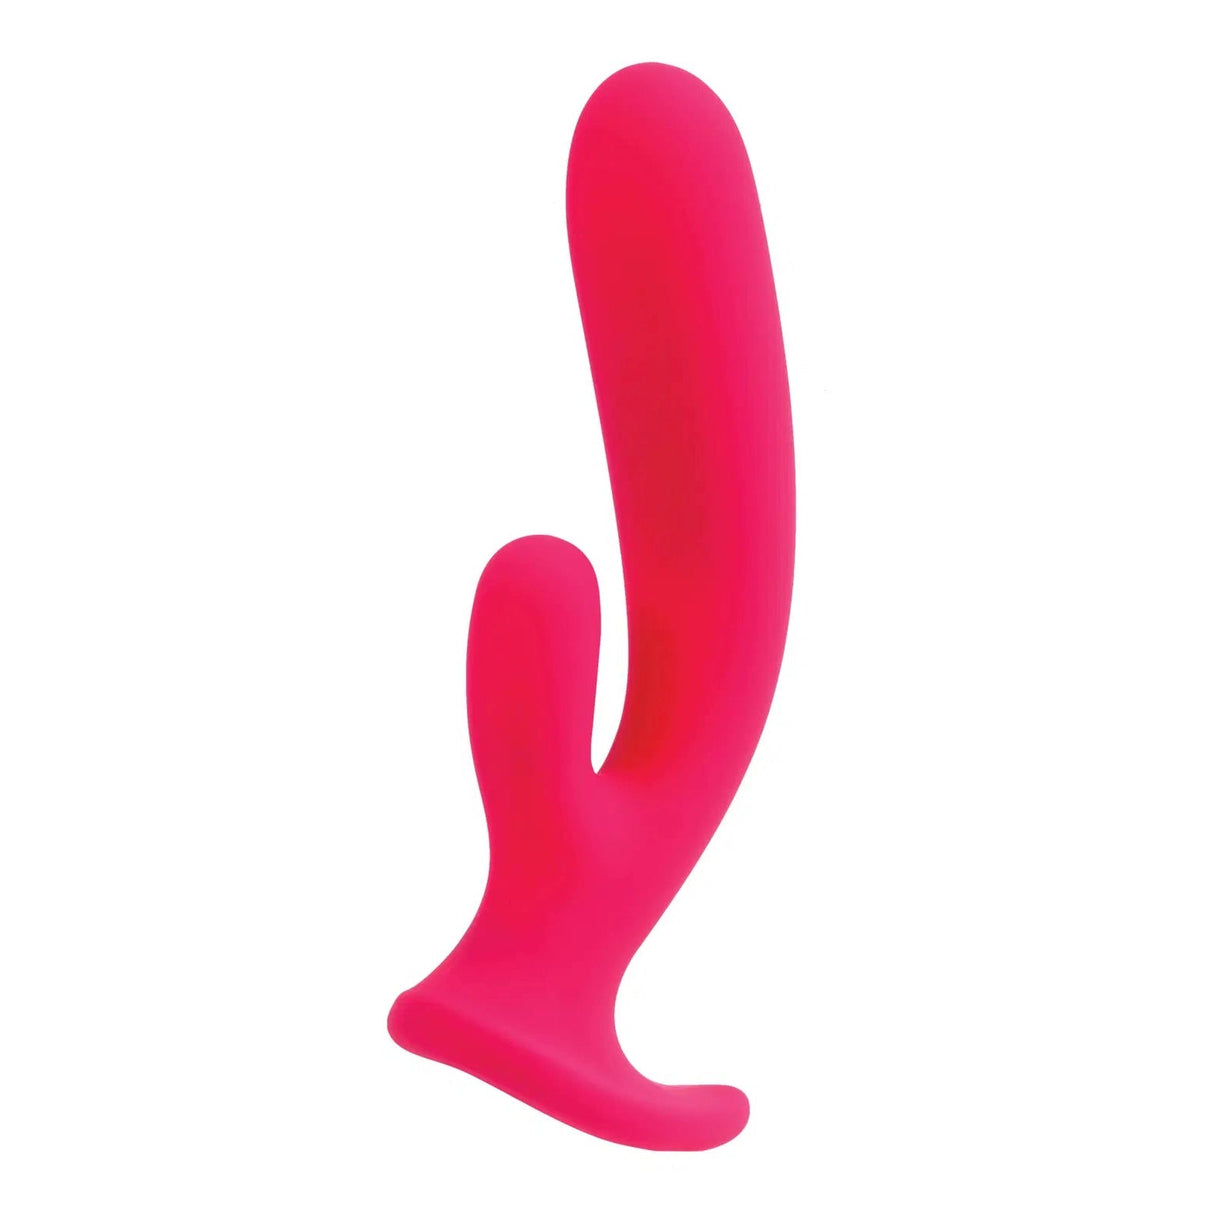 VeDO Wild Rechargeable Dual Stimulation Vibe